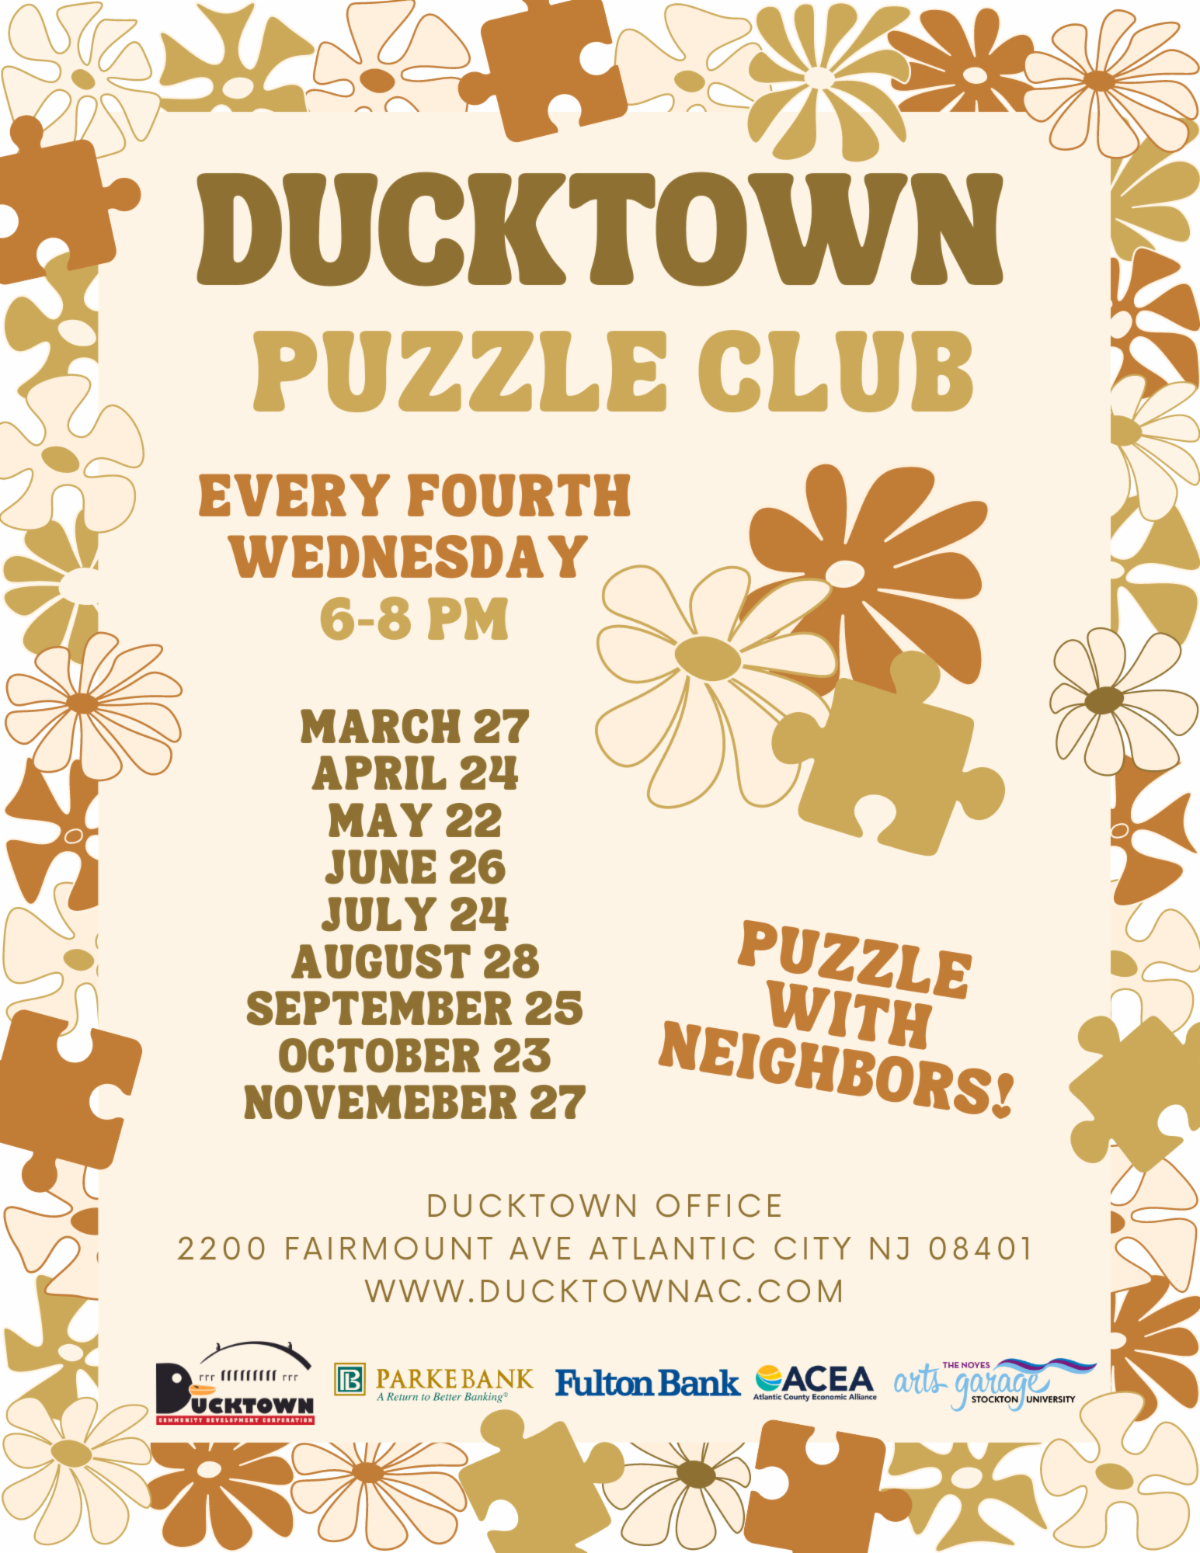 Puzzle Club Flyer English.png